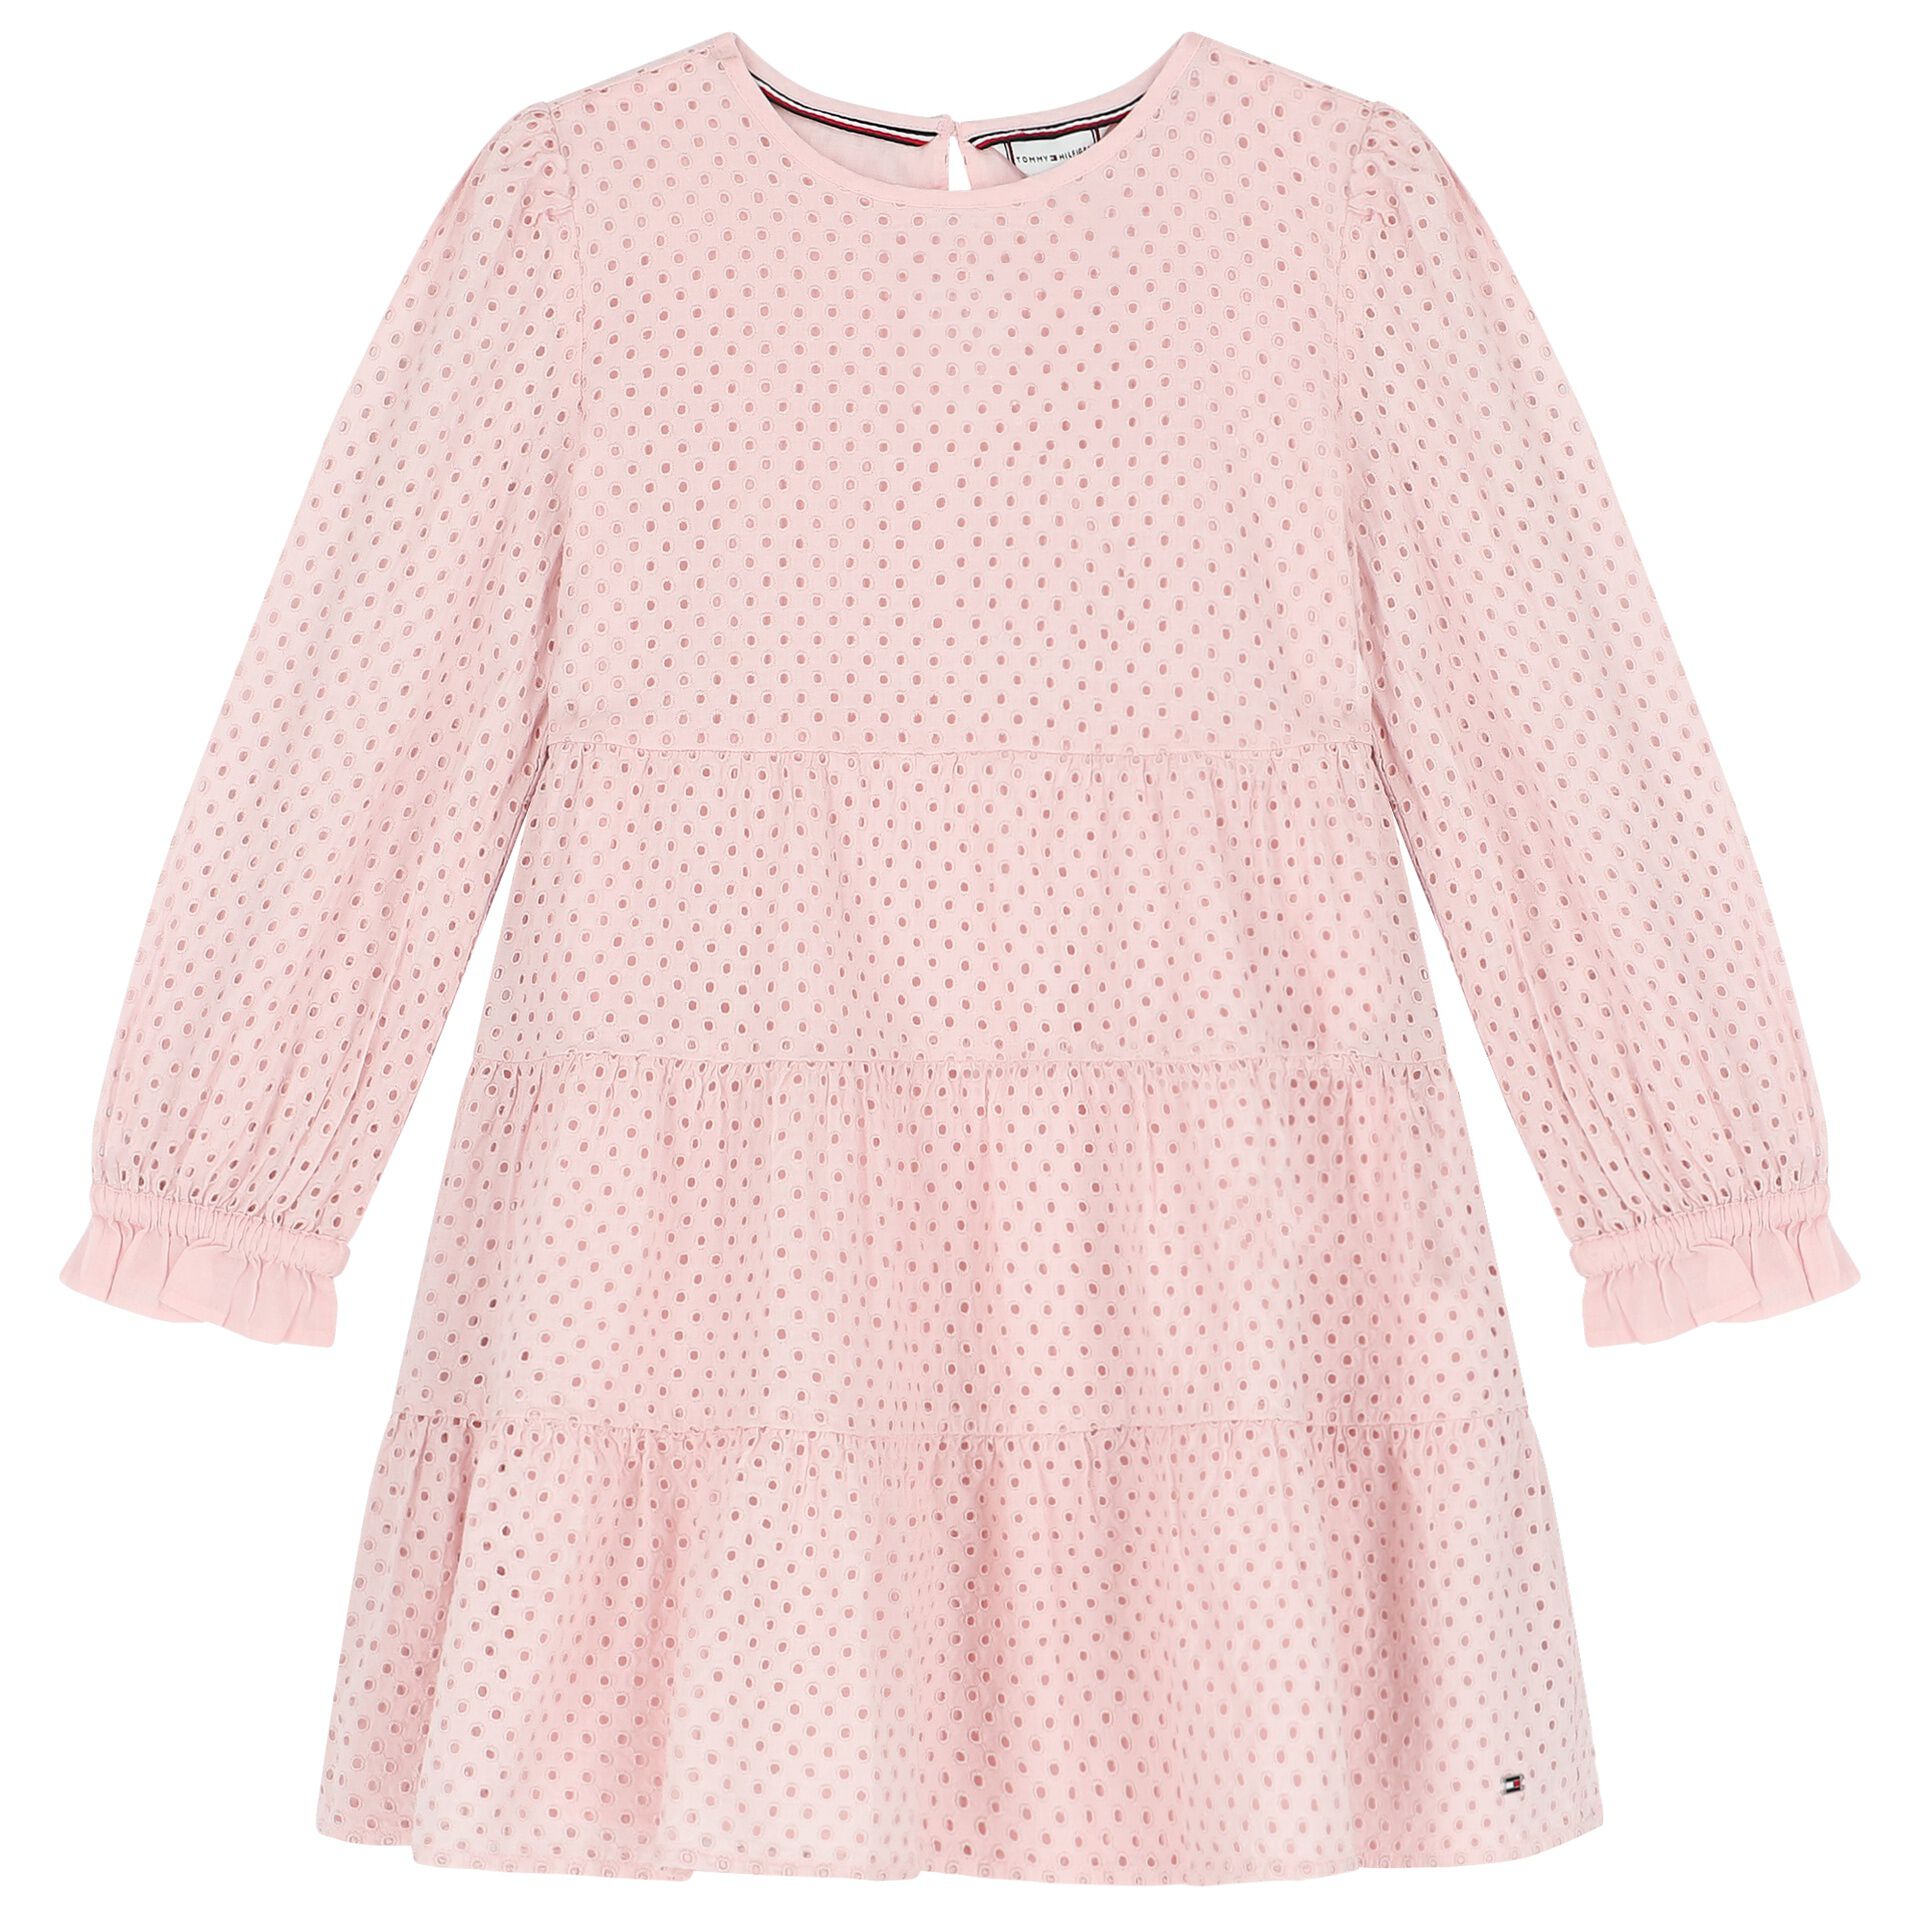 guess kids broderie anglaise cotton dress - Pink